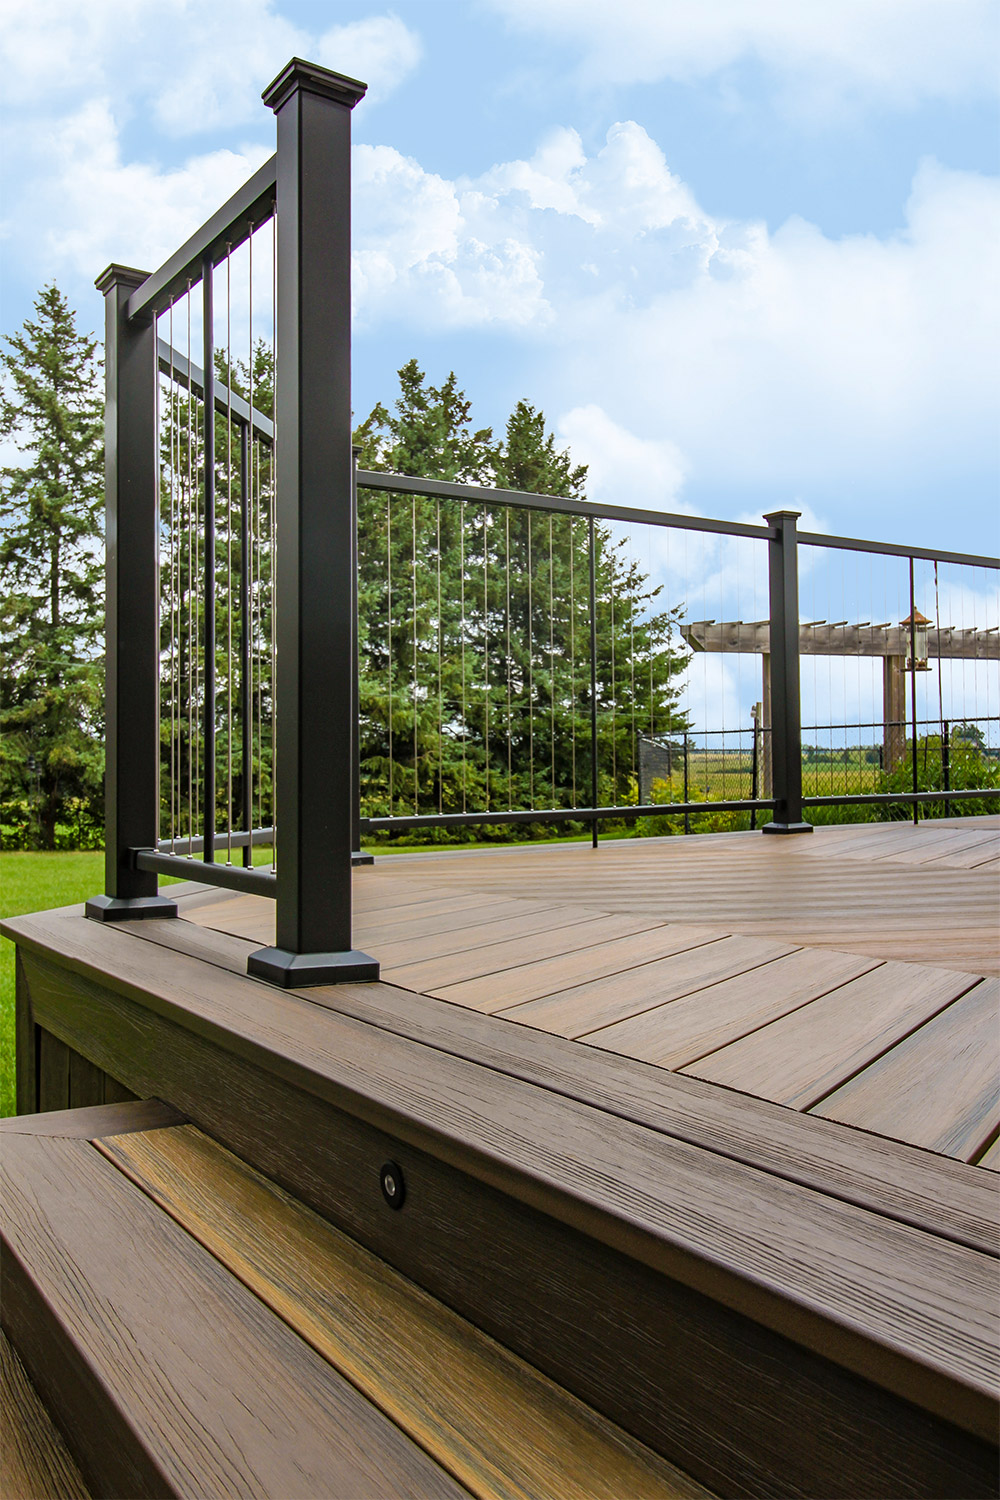 How Far Apart Should Cable Railing Be?